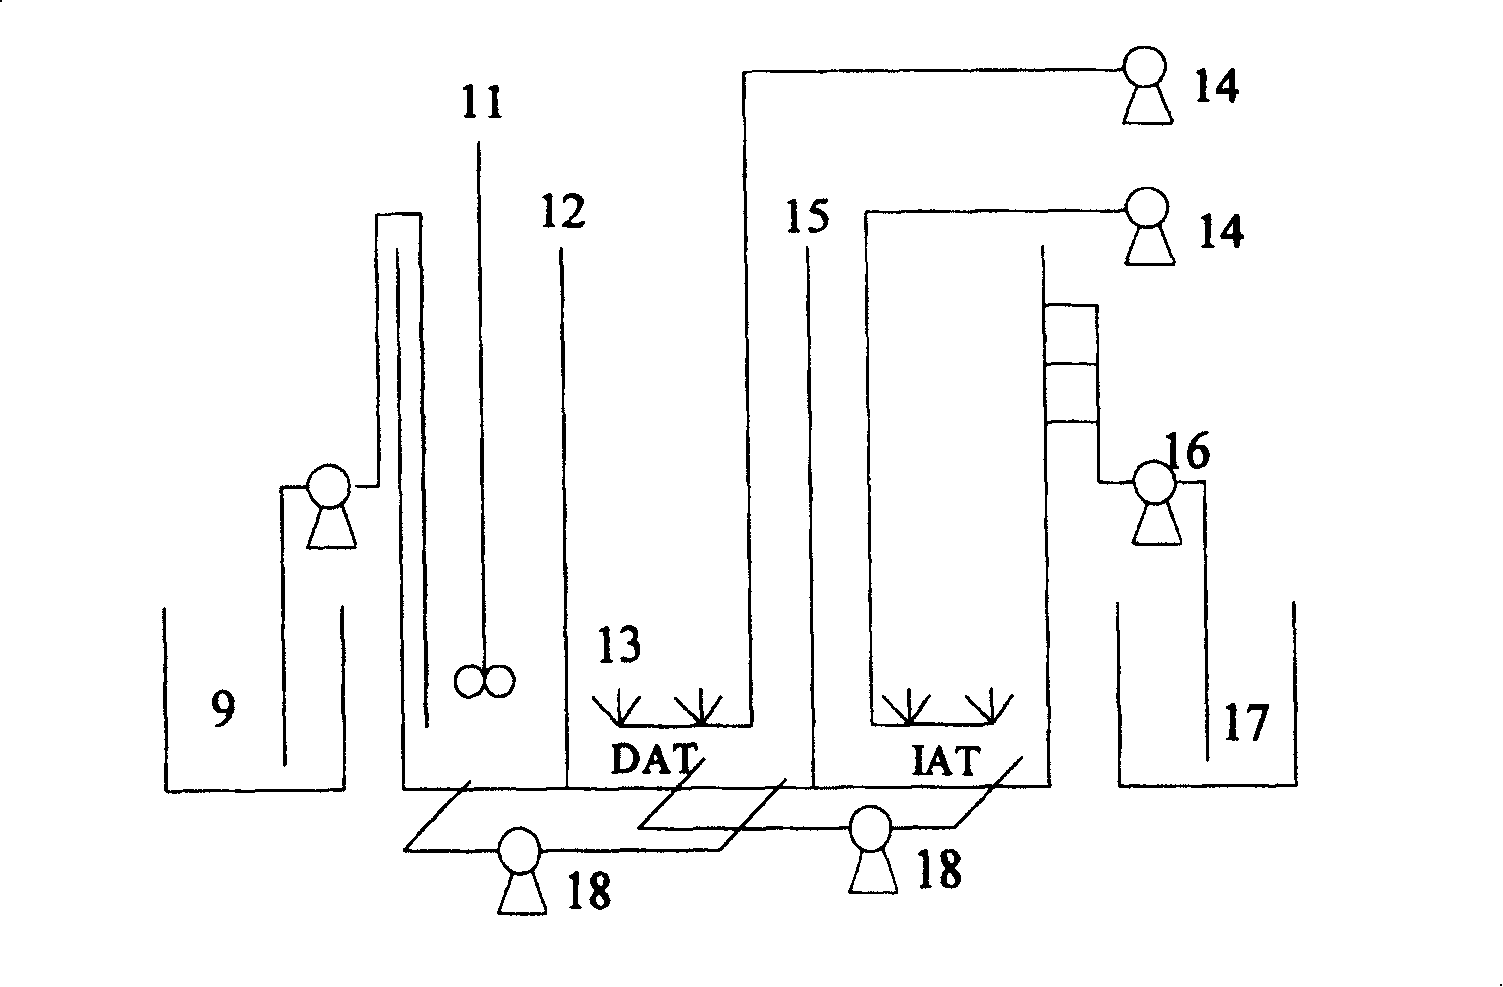 Method for treating wastewater from ADC vesicant, and integrated plant